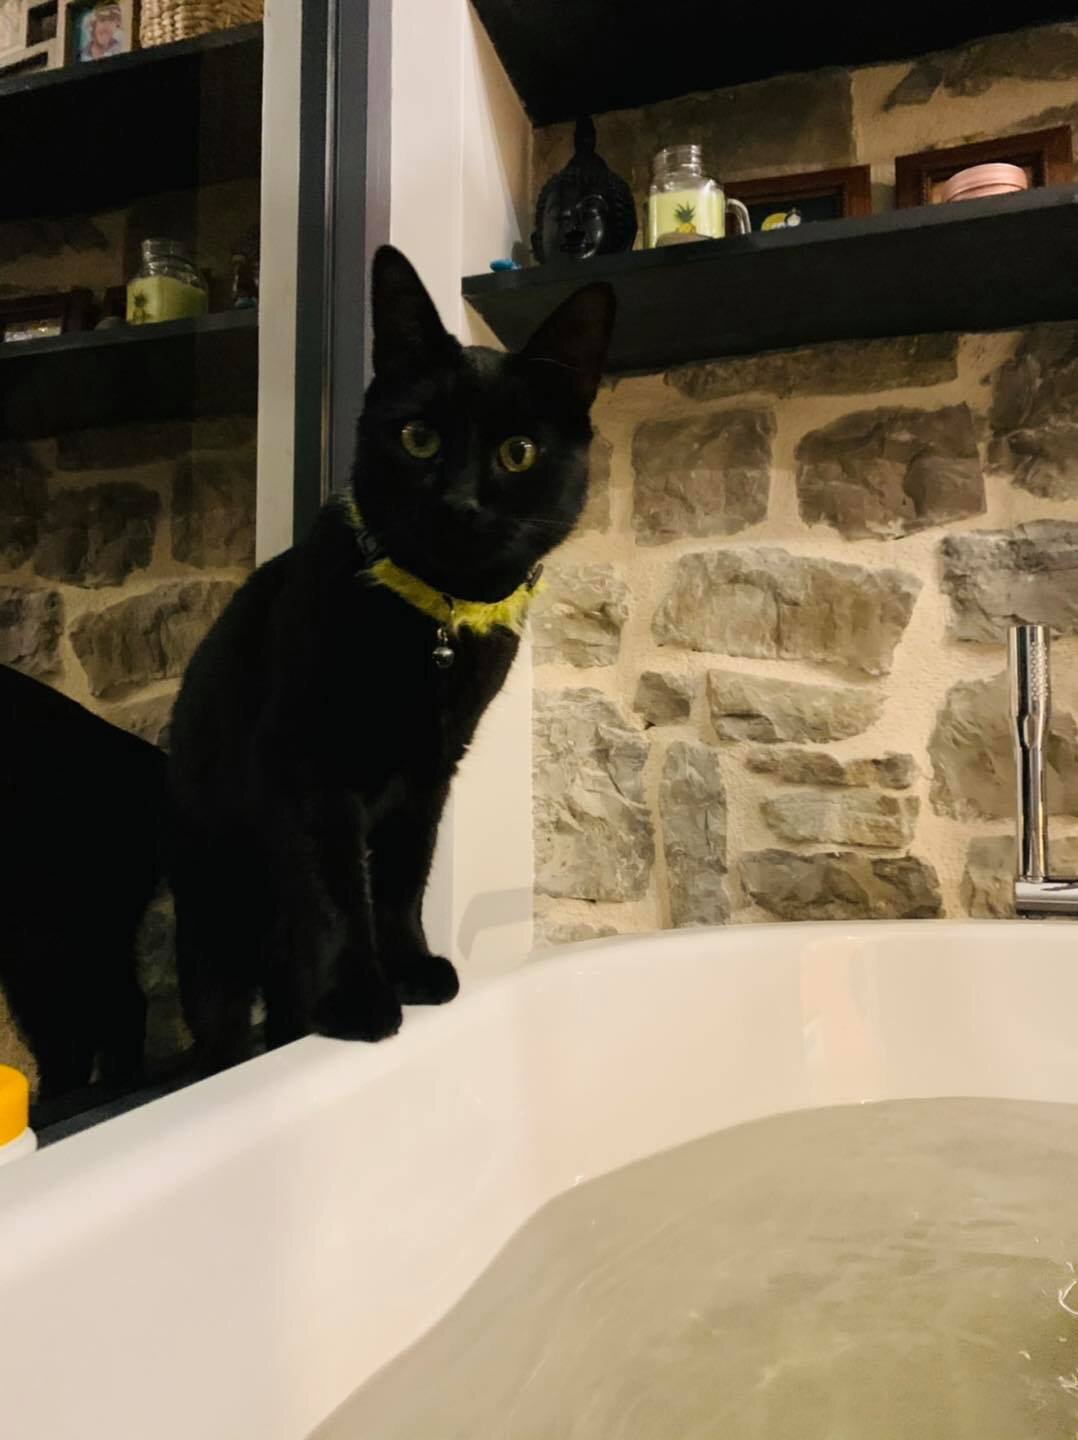 The cats and the bathtub6.jpg